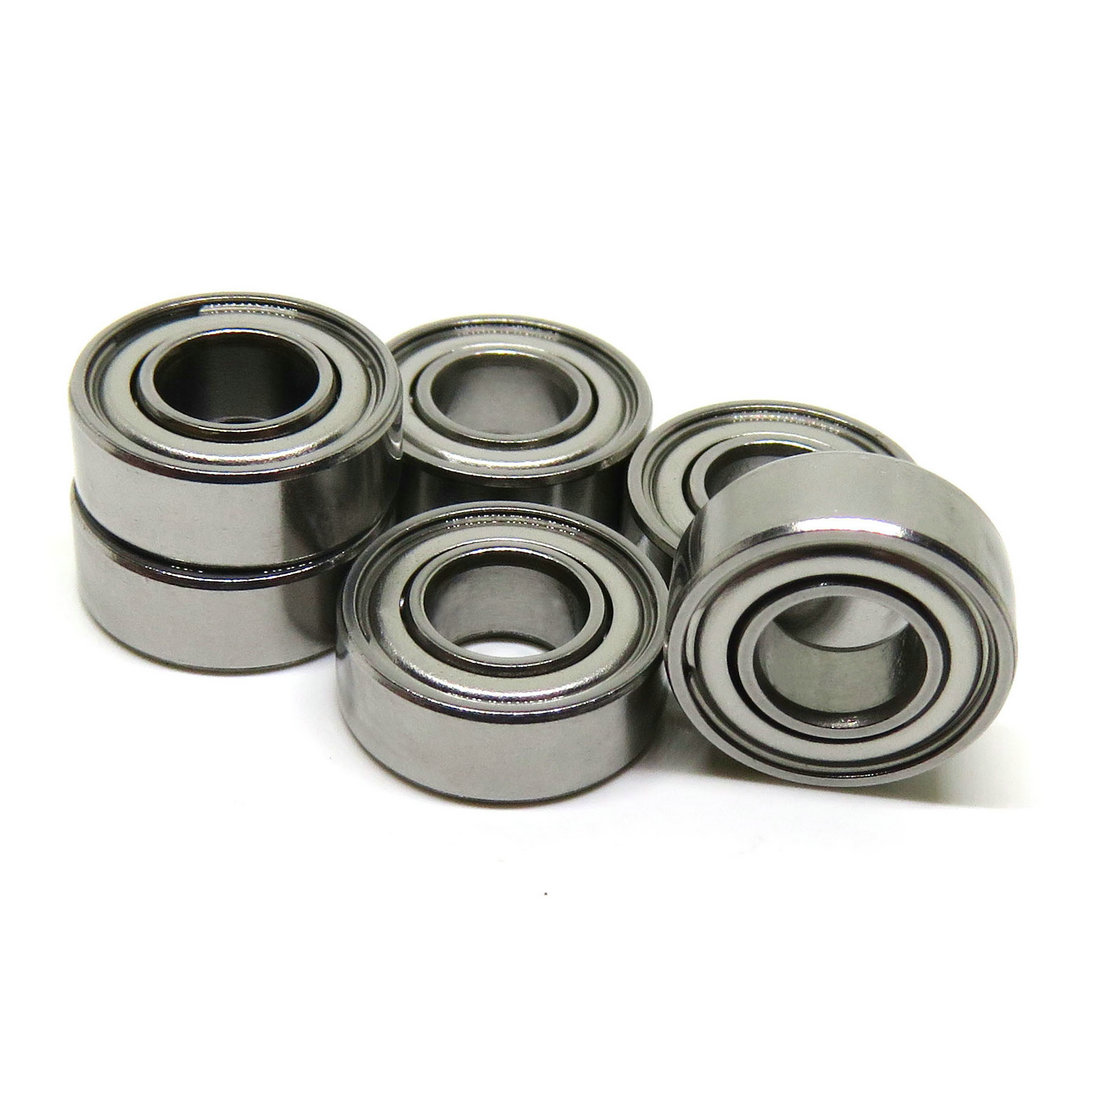 SMR63 Low friction ZZ steel shields 3x6x2.5 ceramic bearing 440c stainless steel ring with si3n4 ceramic ball